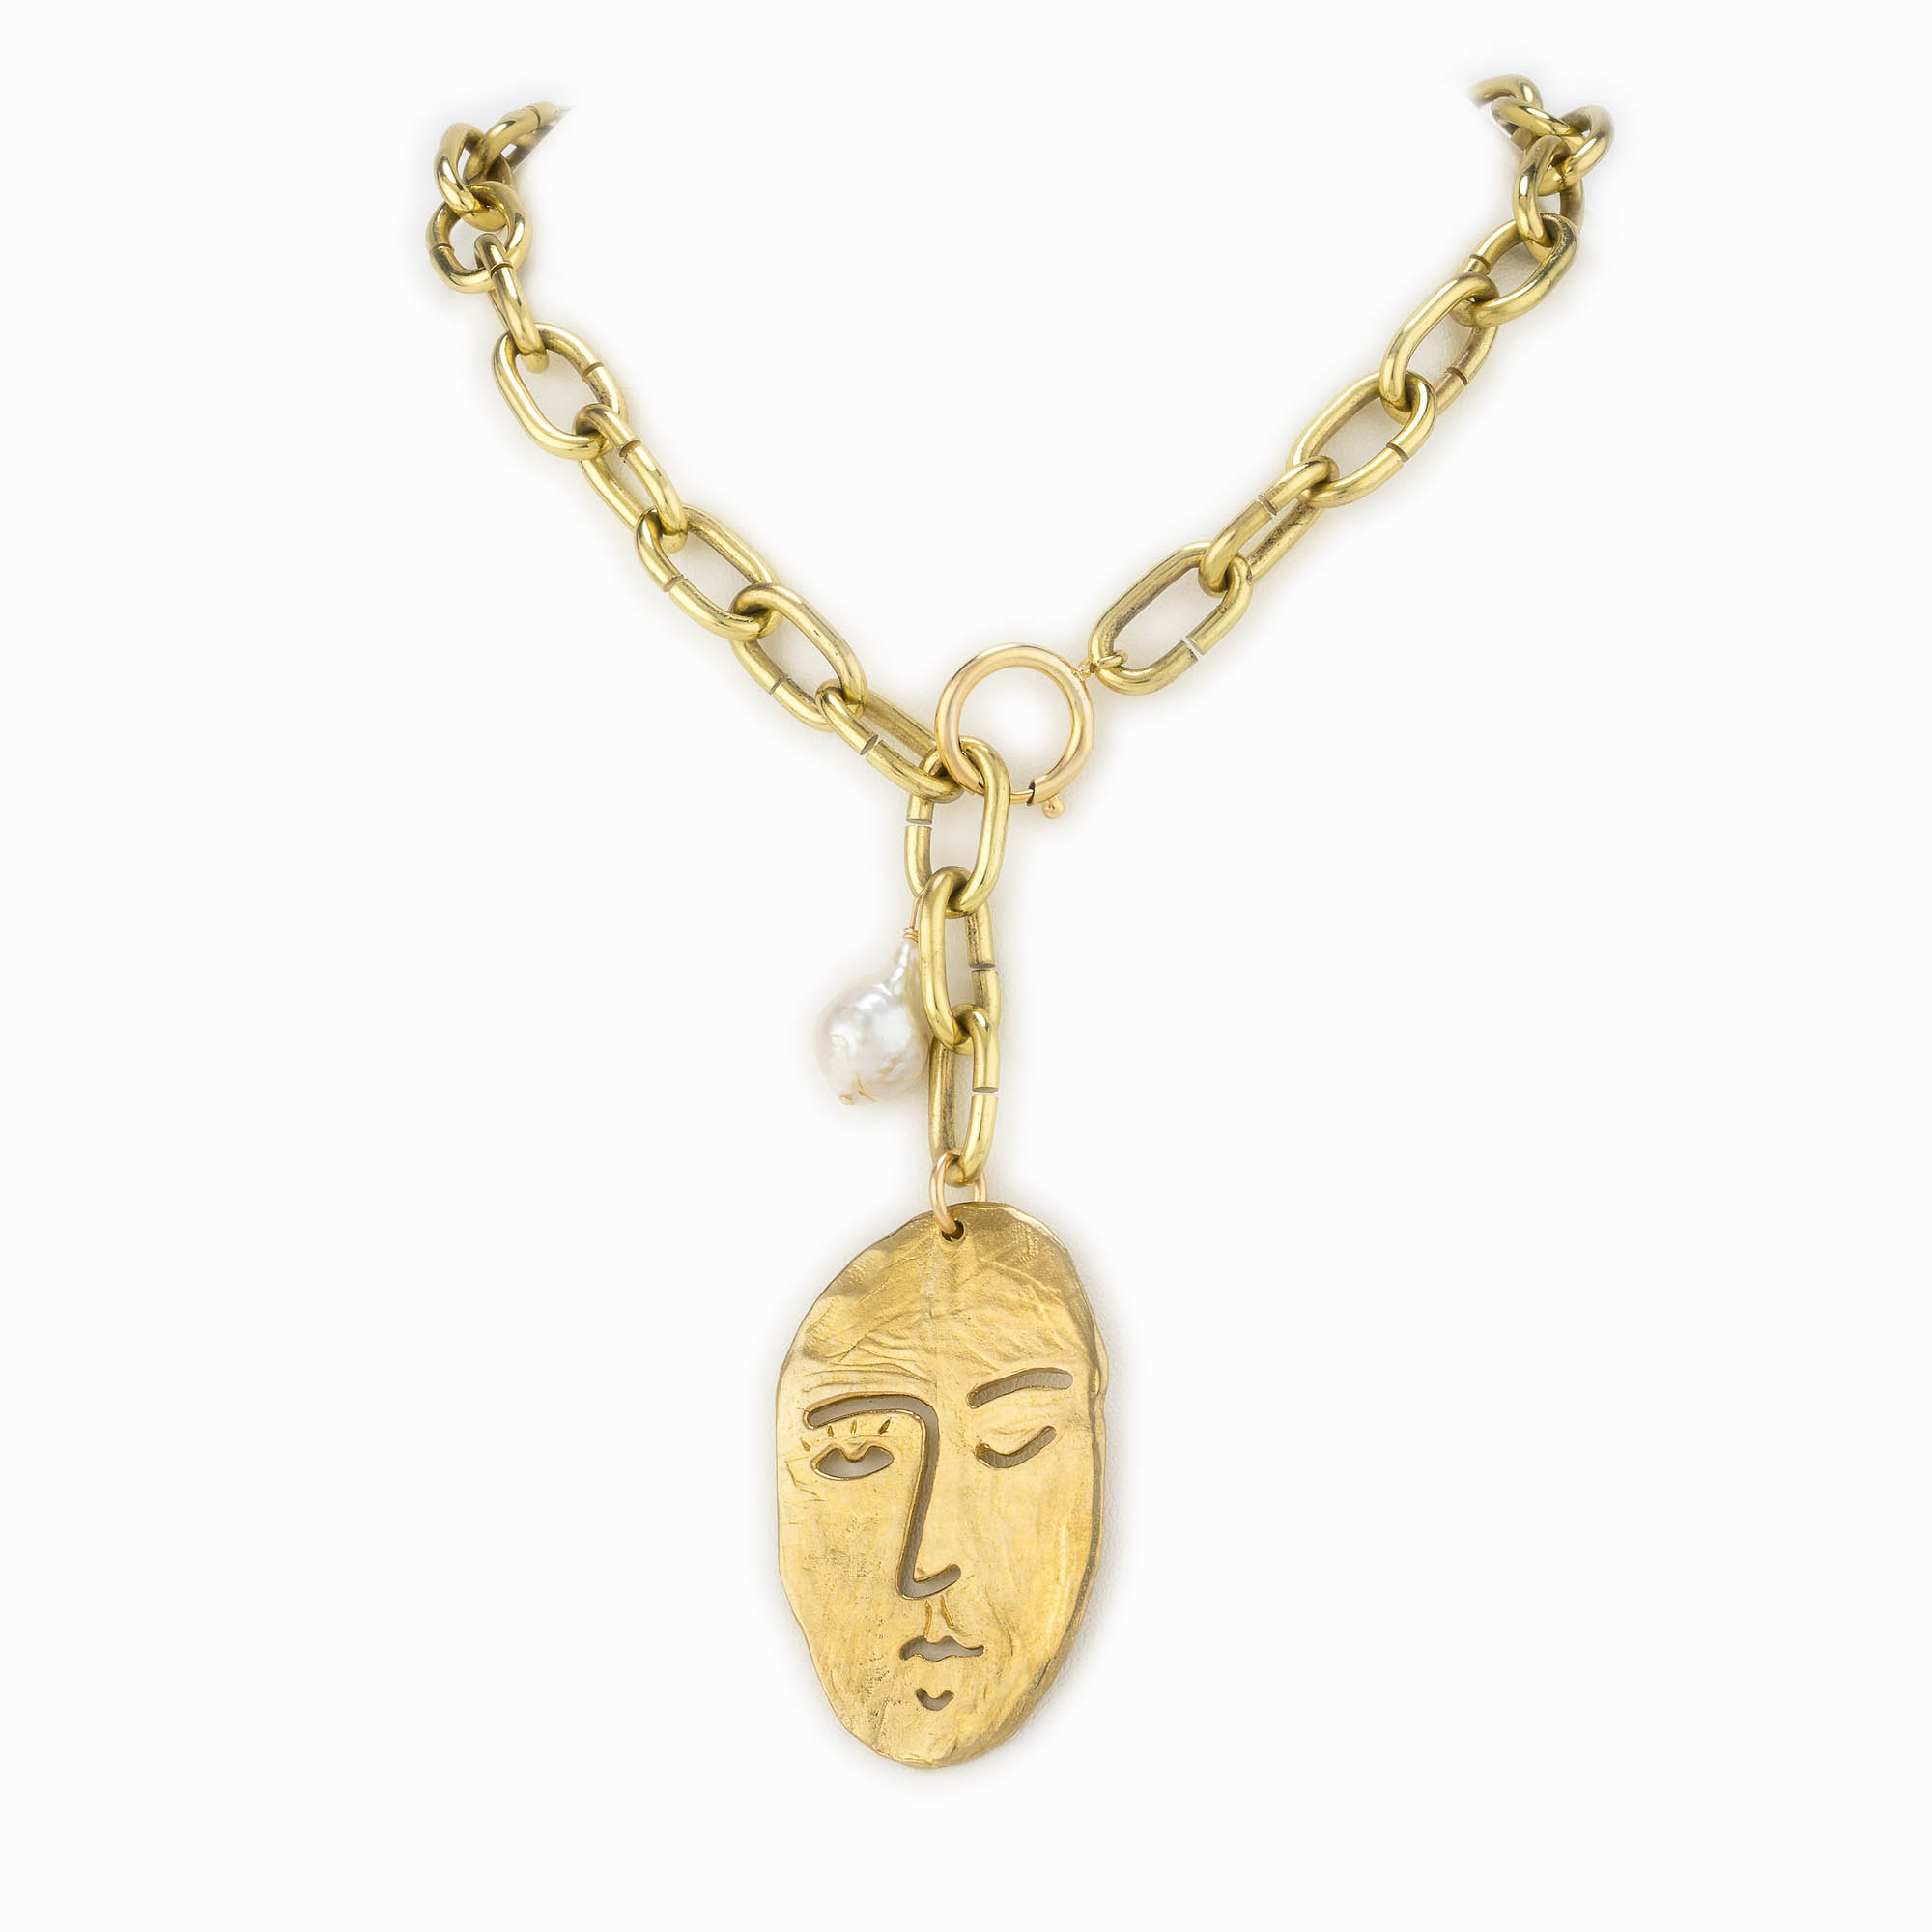 Featured image for “Viso Brass Necklace”